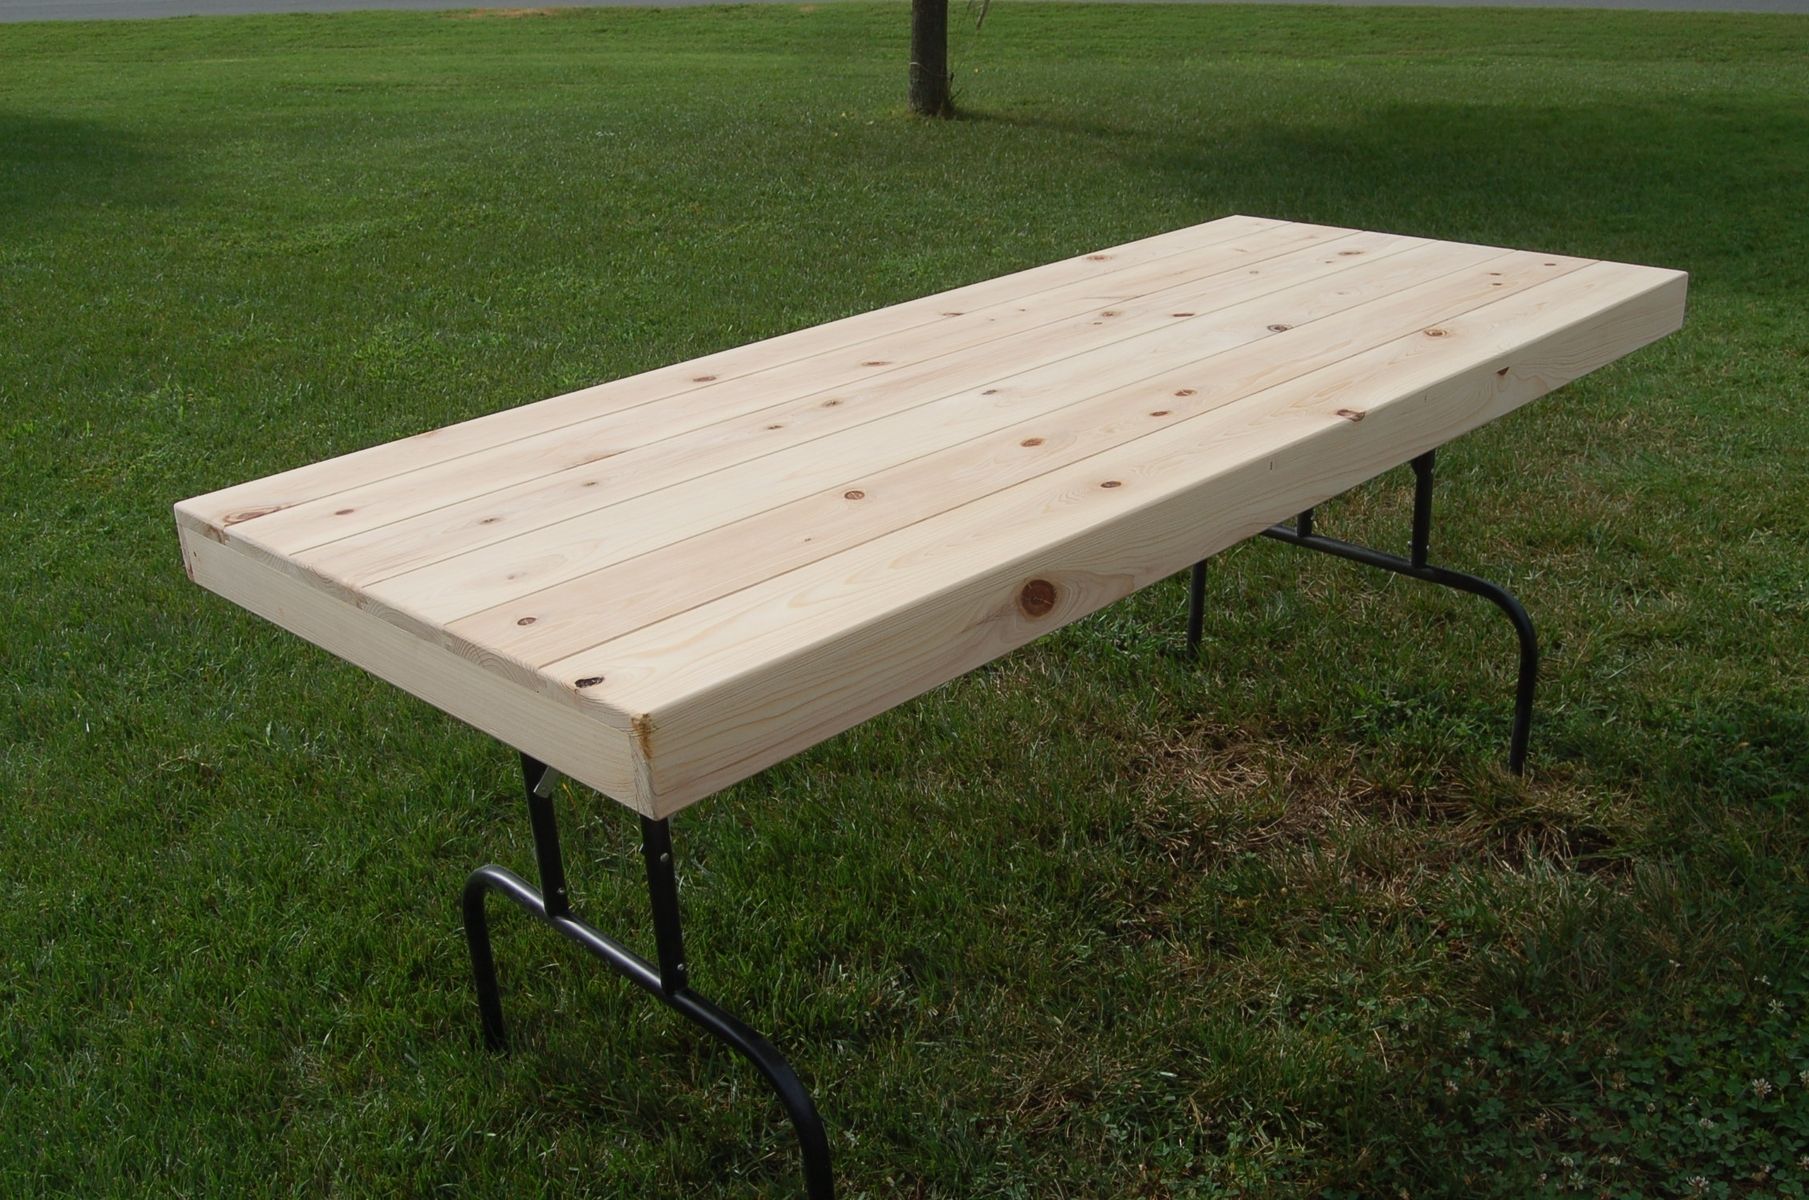 How to make a foldable wood table ~ Garden bench wooden